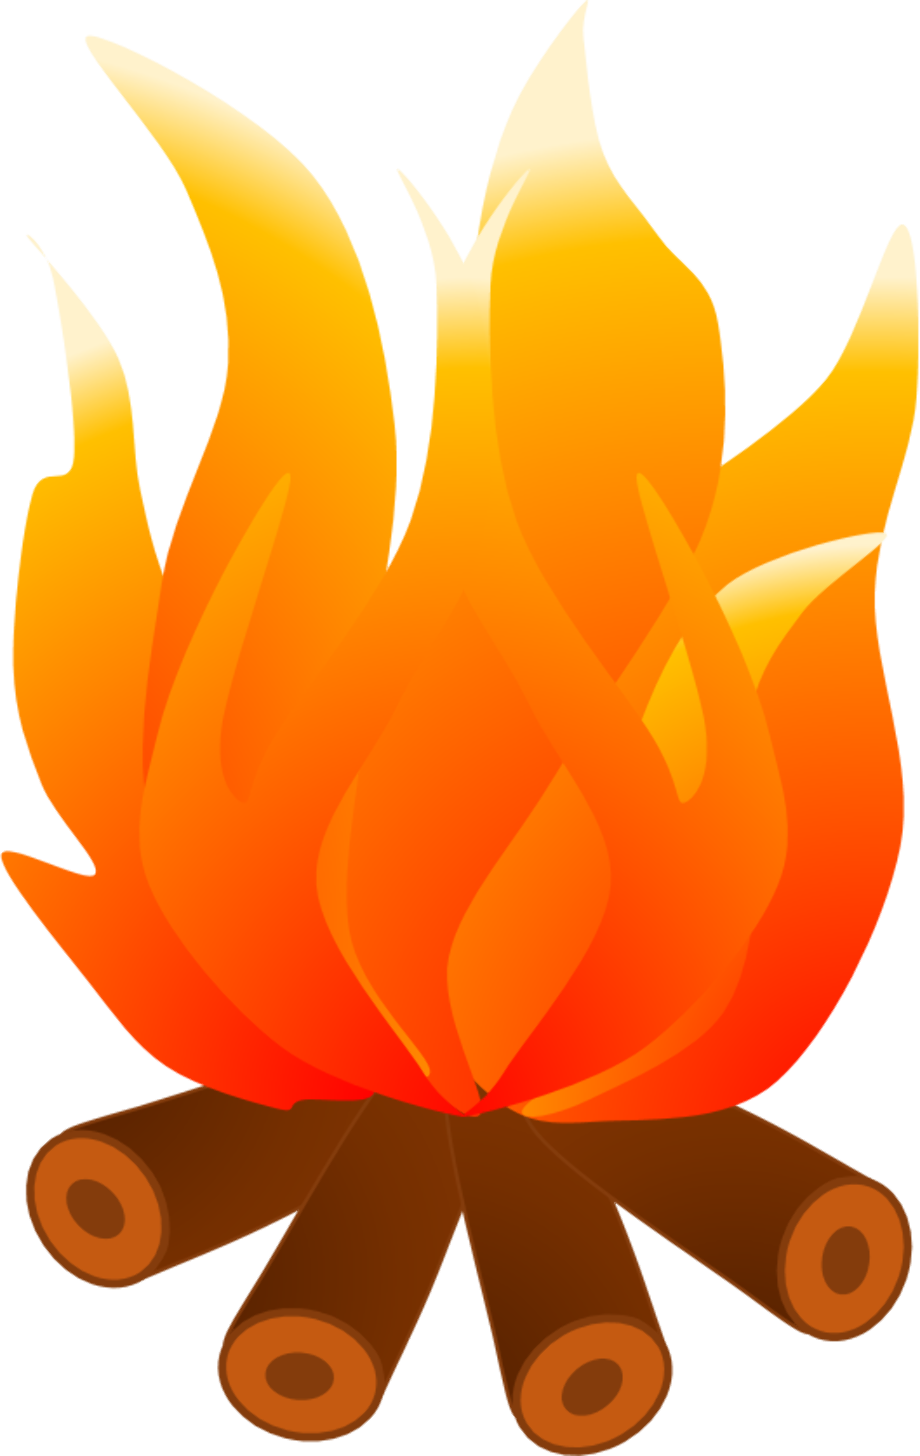 smores clipart fire pit